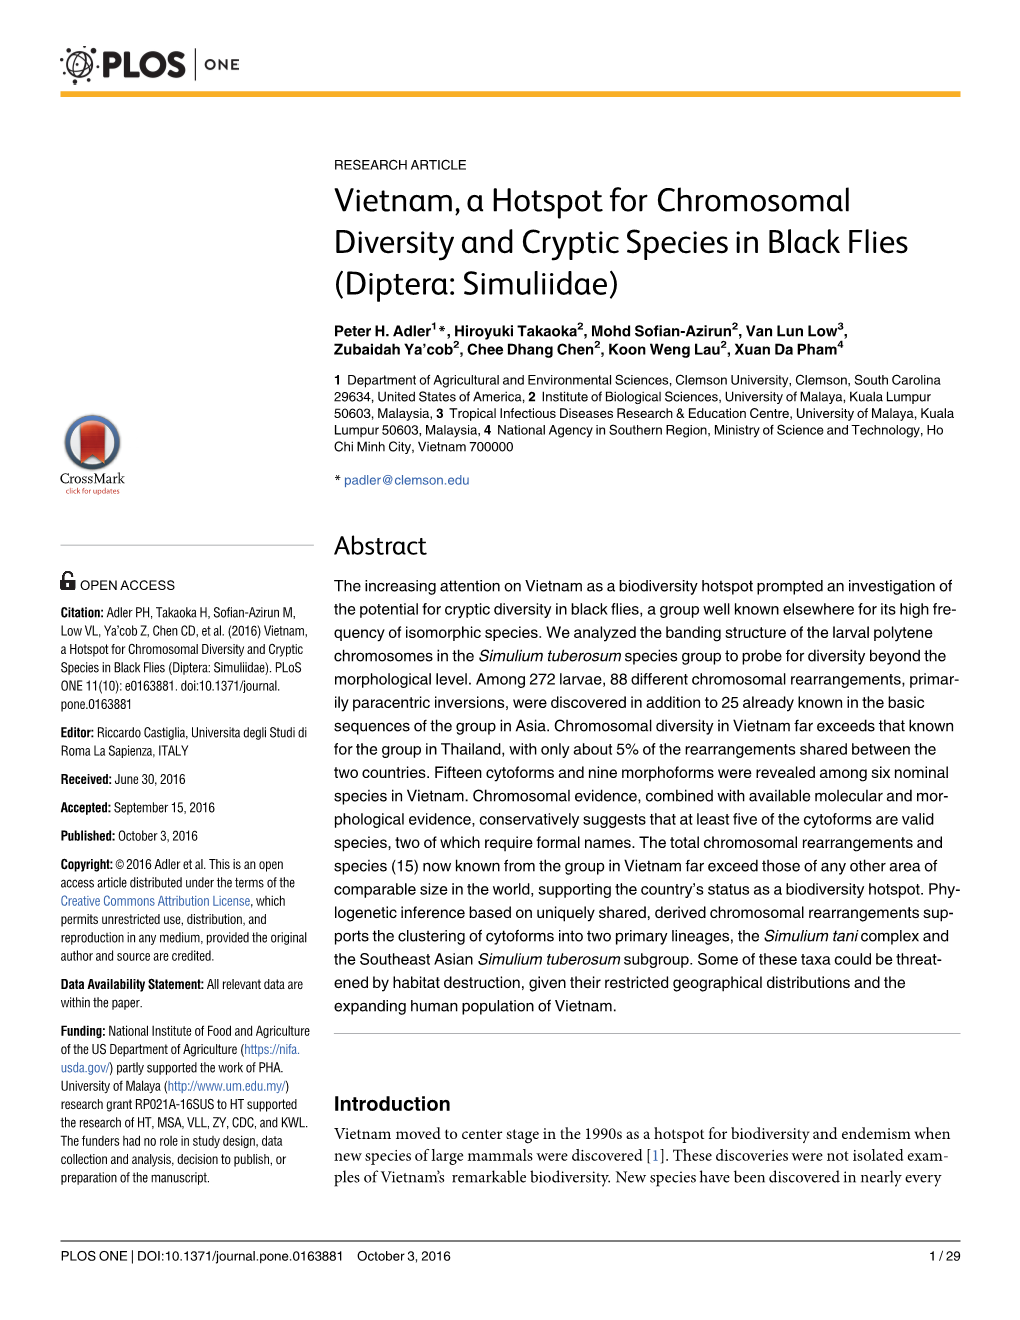 Vietnam, a Hotspot for Chromosomal Diversity and Cryptic Species in Black Flies (Diptera: Simuliidae)